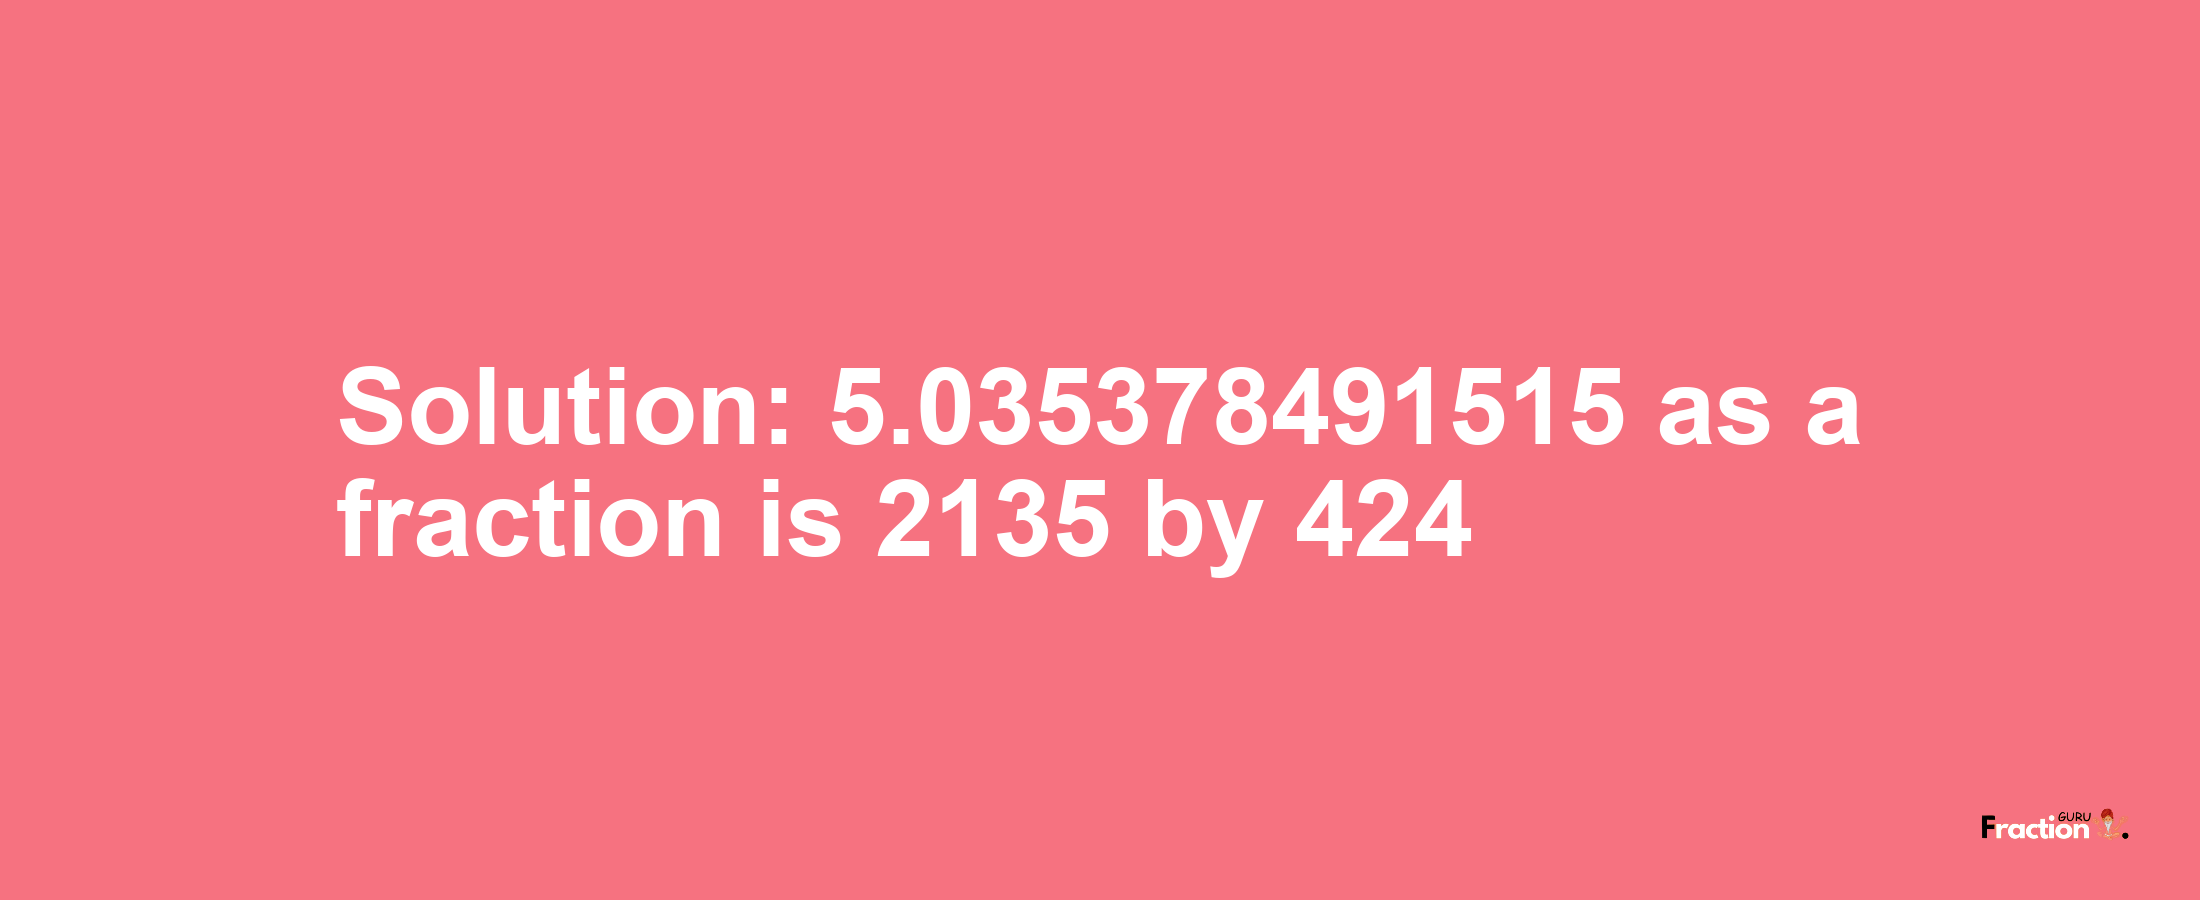 Solution:5.035378491515 as a fraction is 2135/424